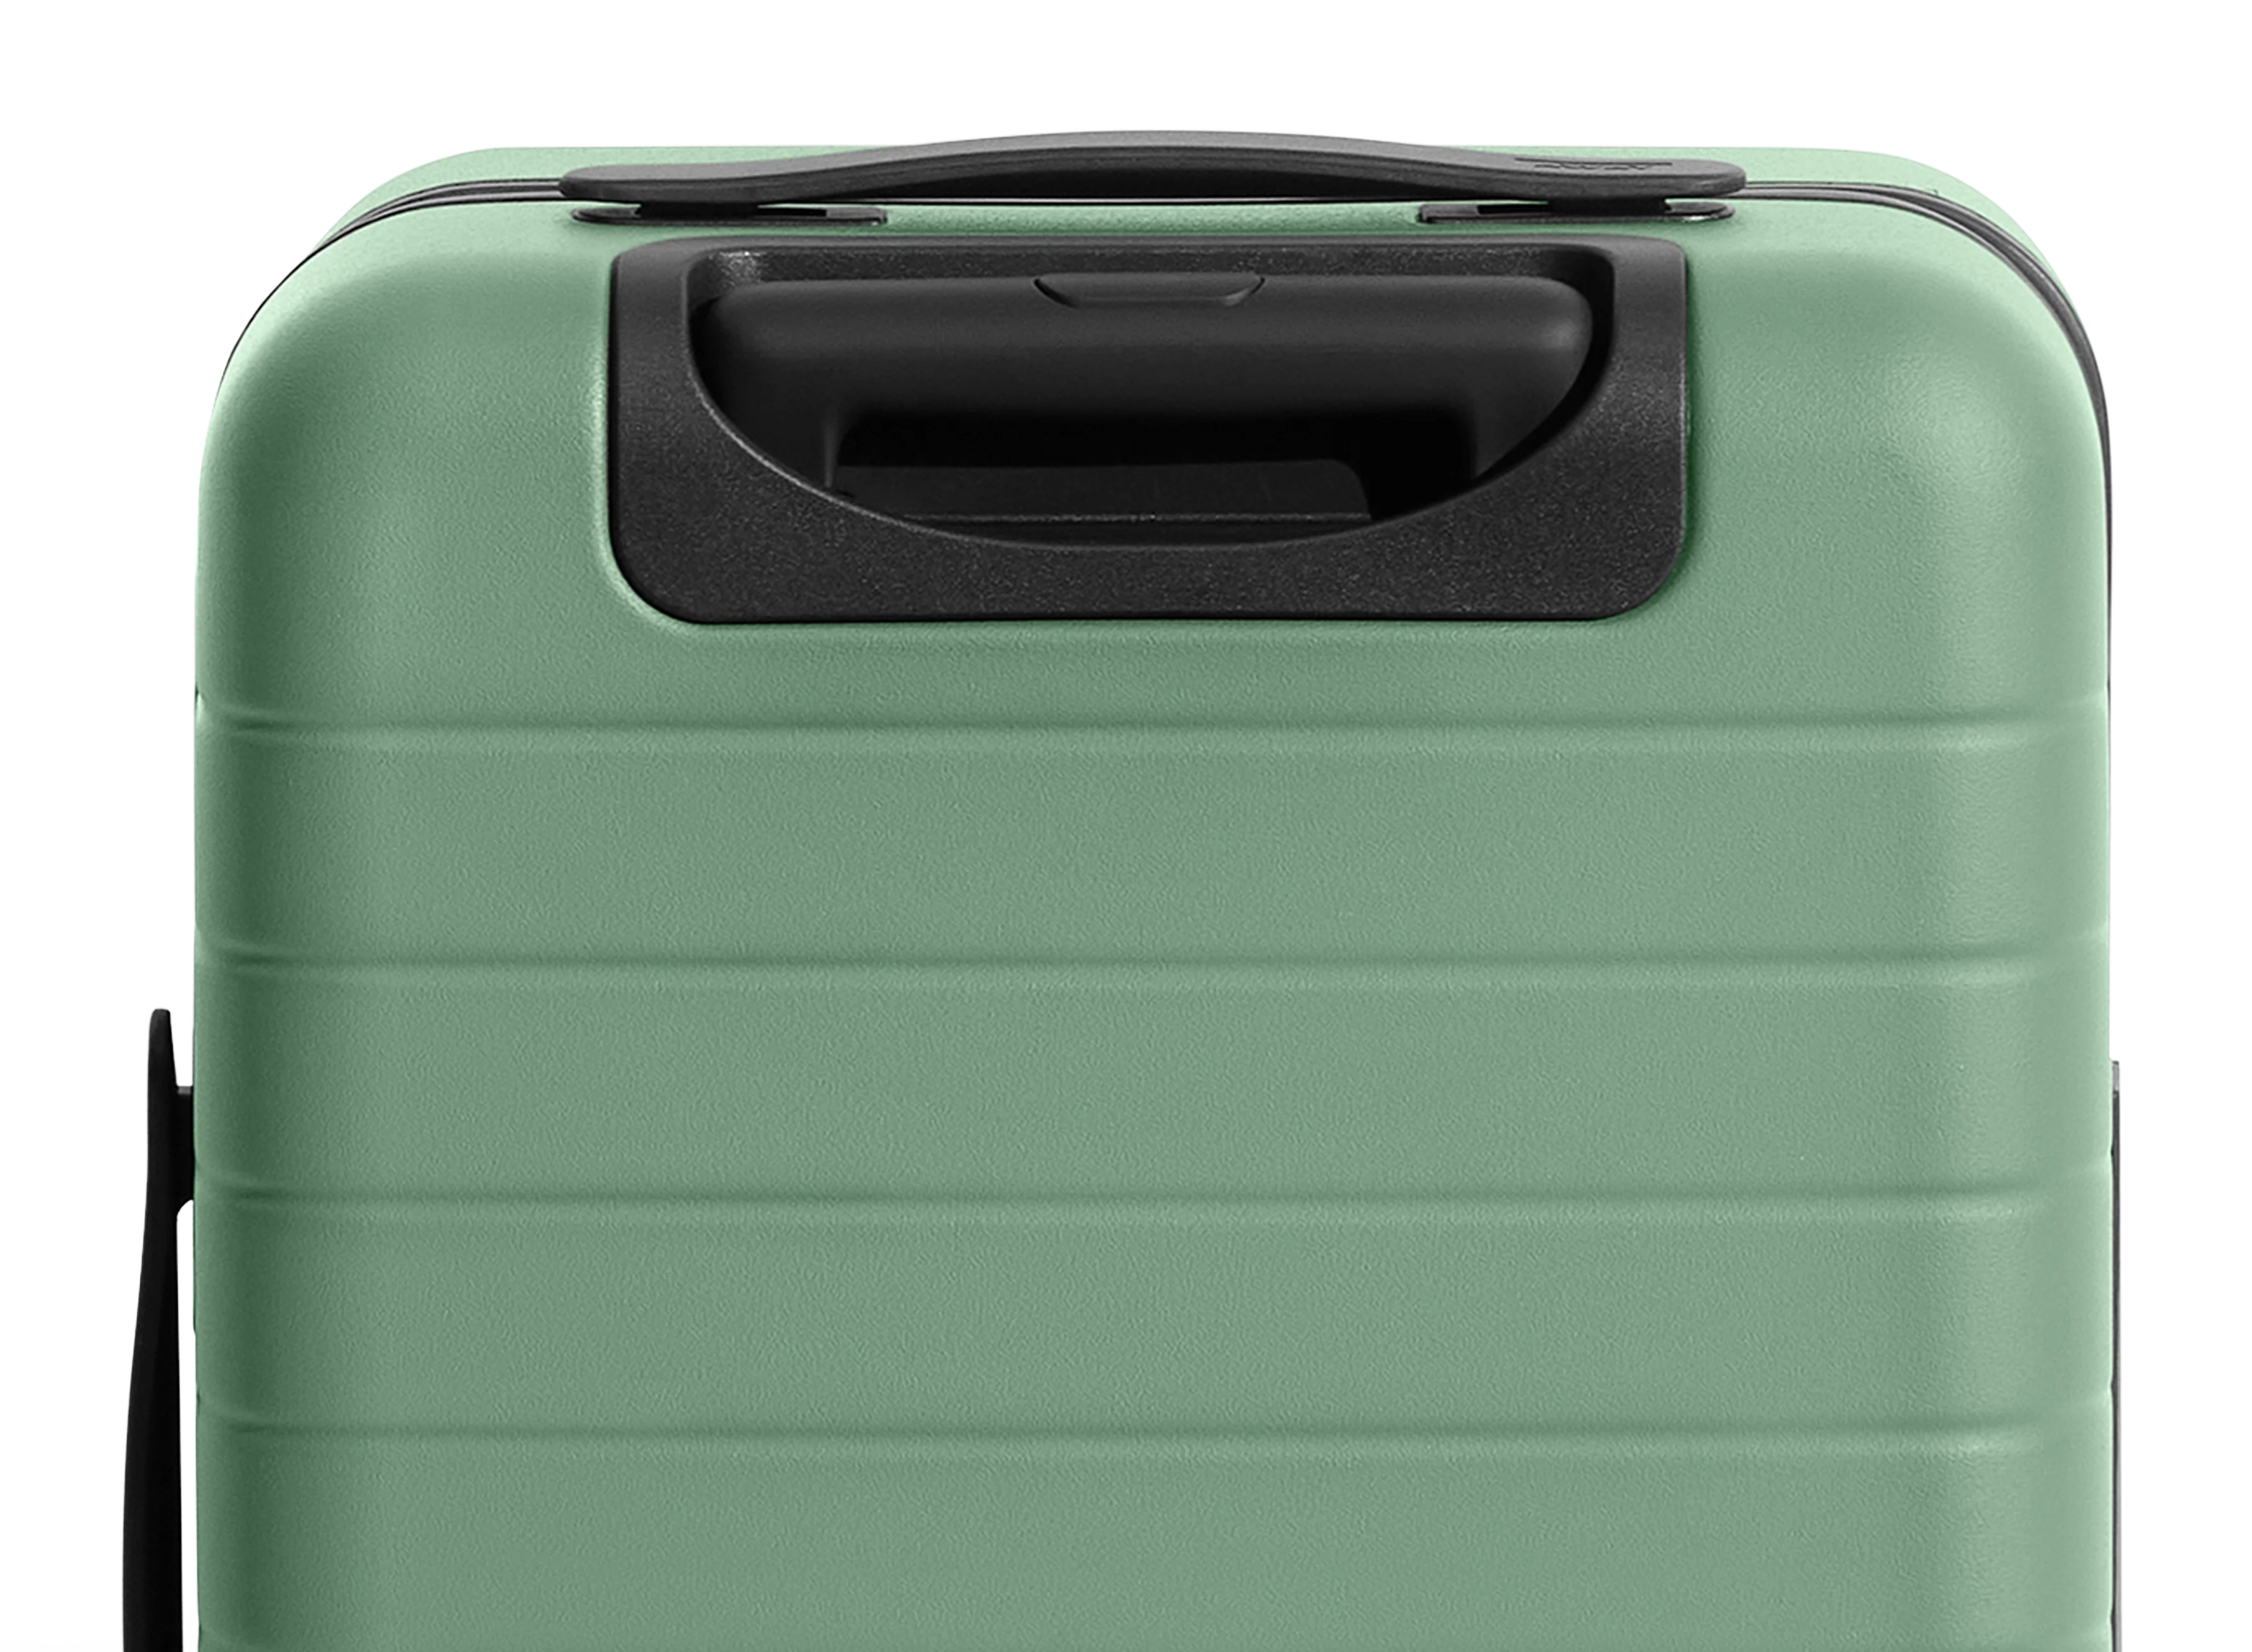 The Carry-On Flex in Sea Green